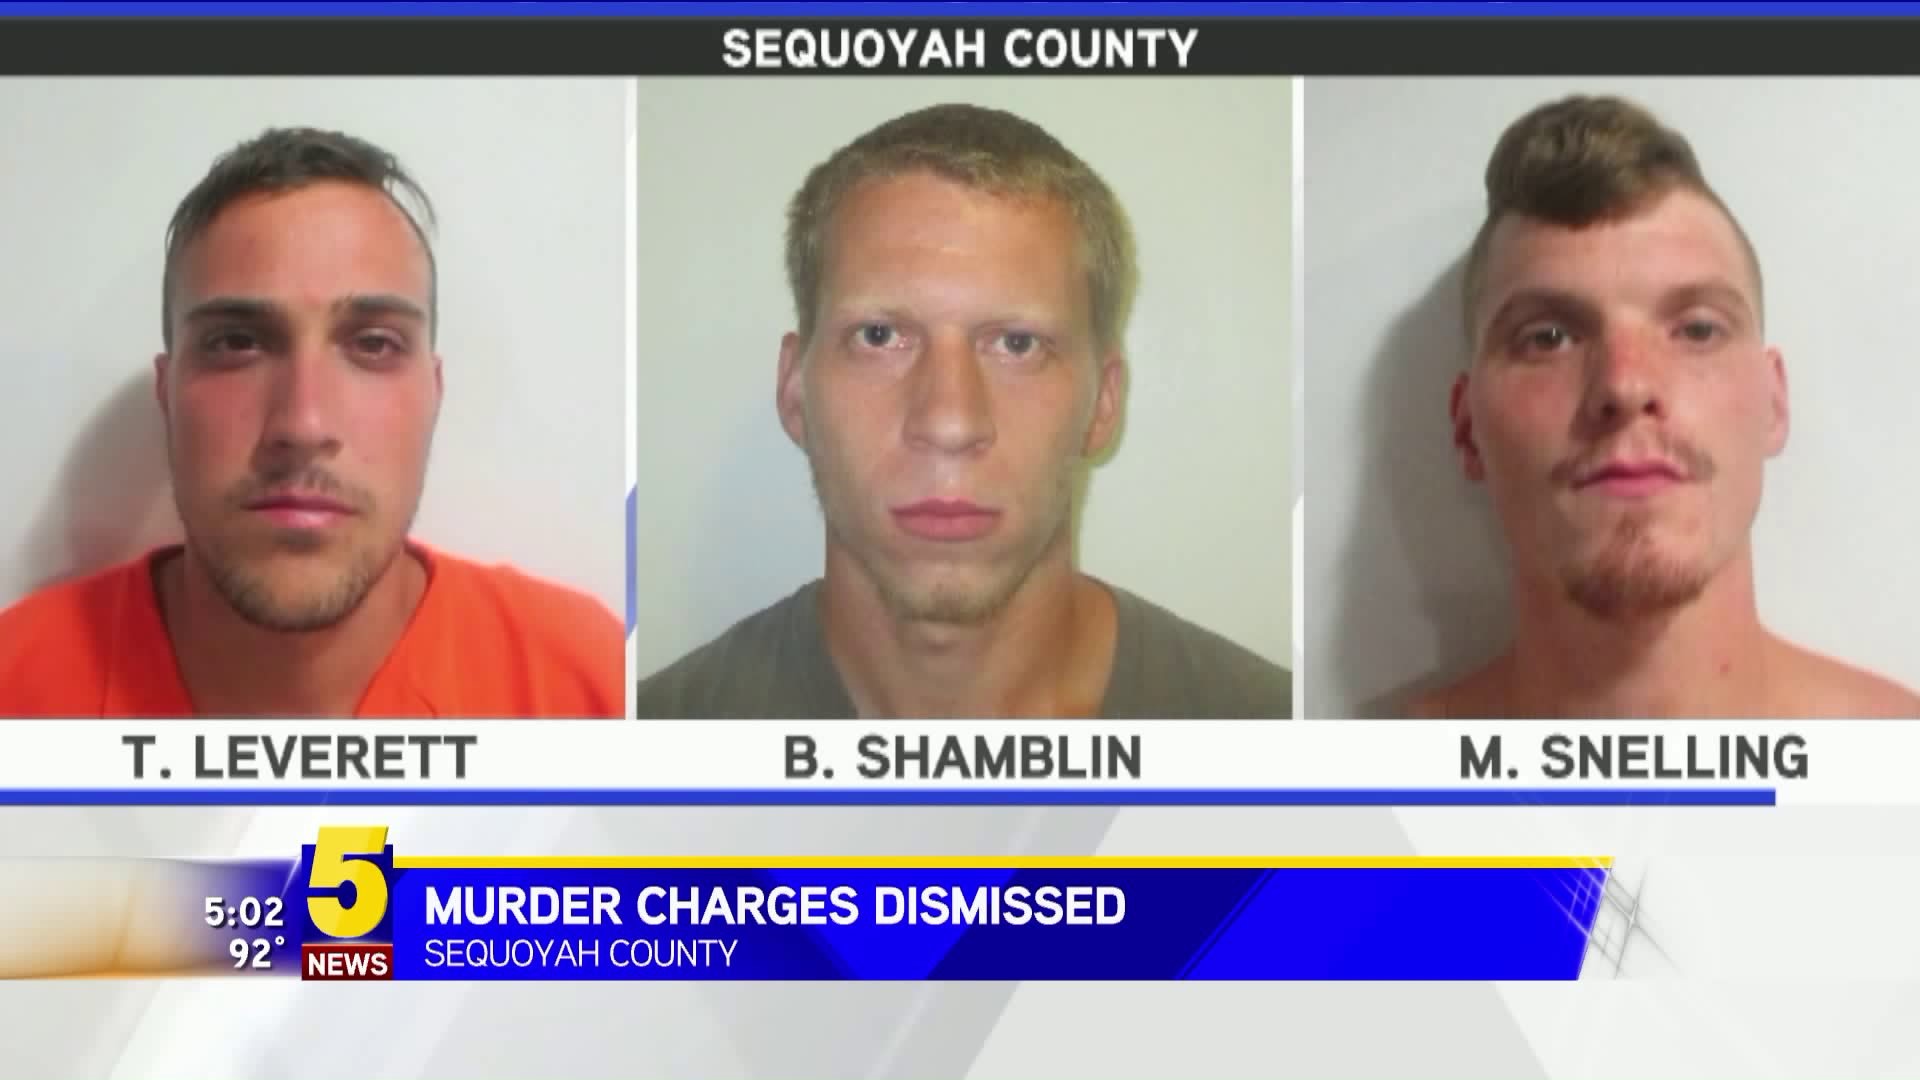 Sequoyah County Murder Charges Dismissed